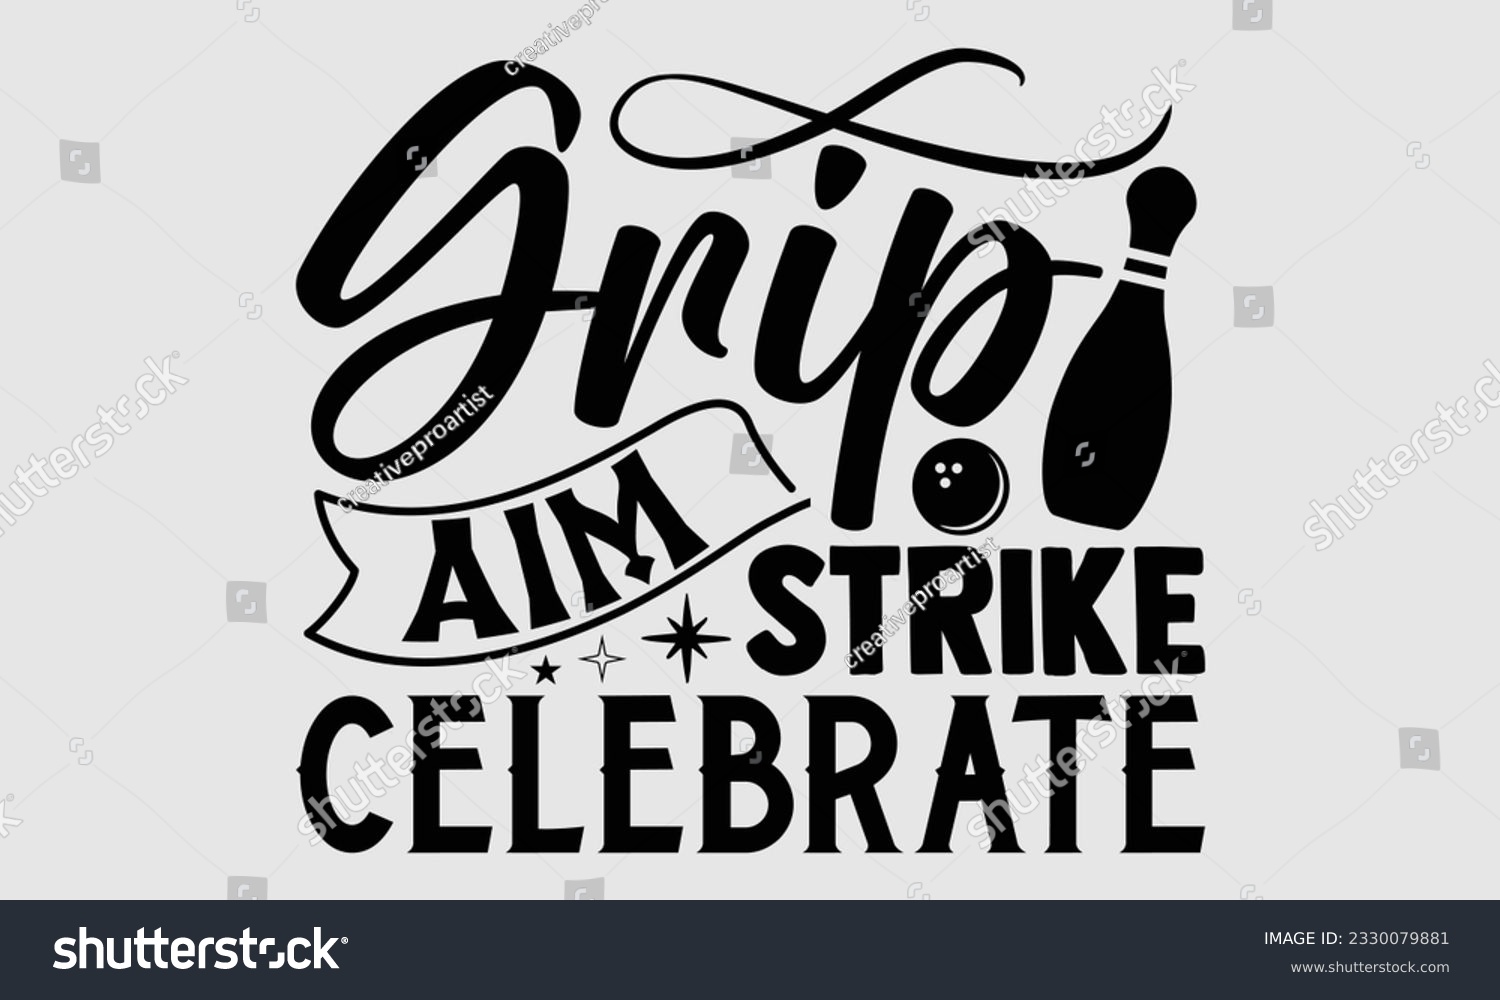 SVG of Grip Aim Strike Celebrate- Bowling t-shirt design, Handmade calligraphy vector Illustration for prints on SVG and bags, posters, greeting card template EPS svg